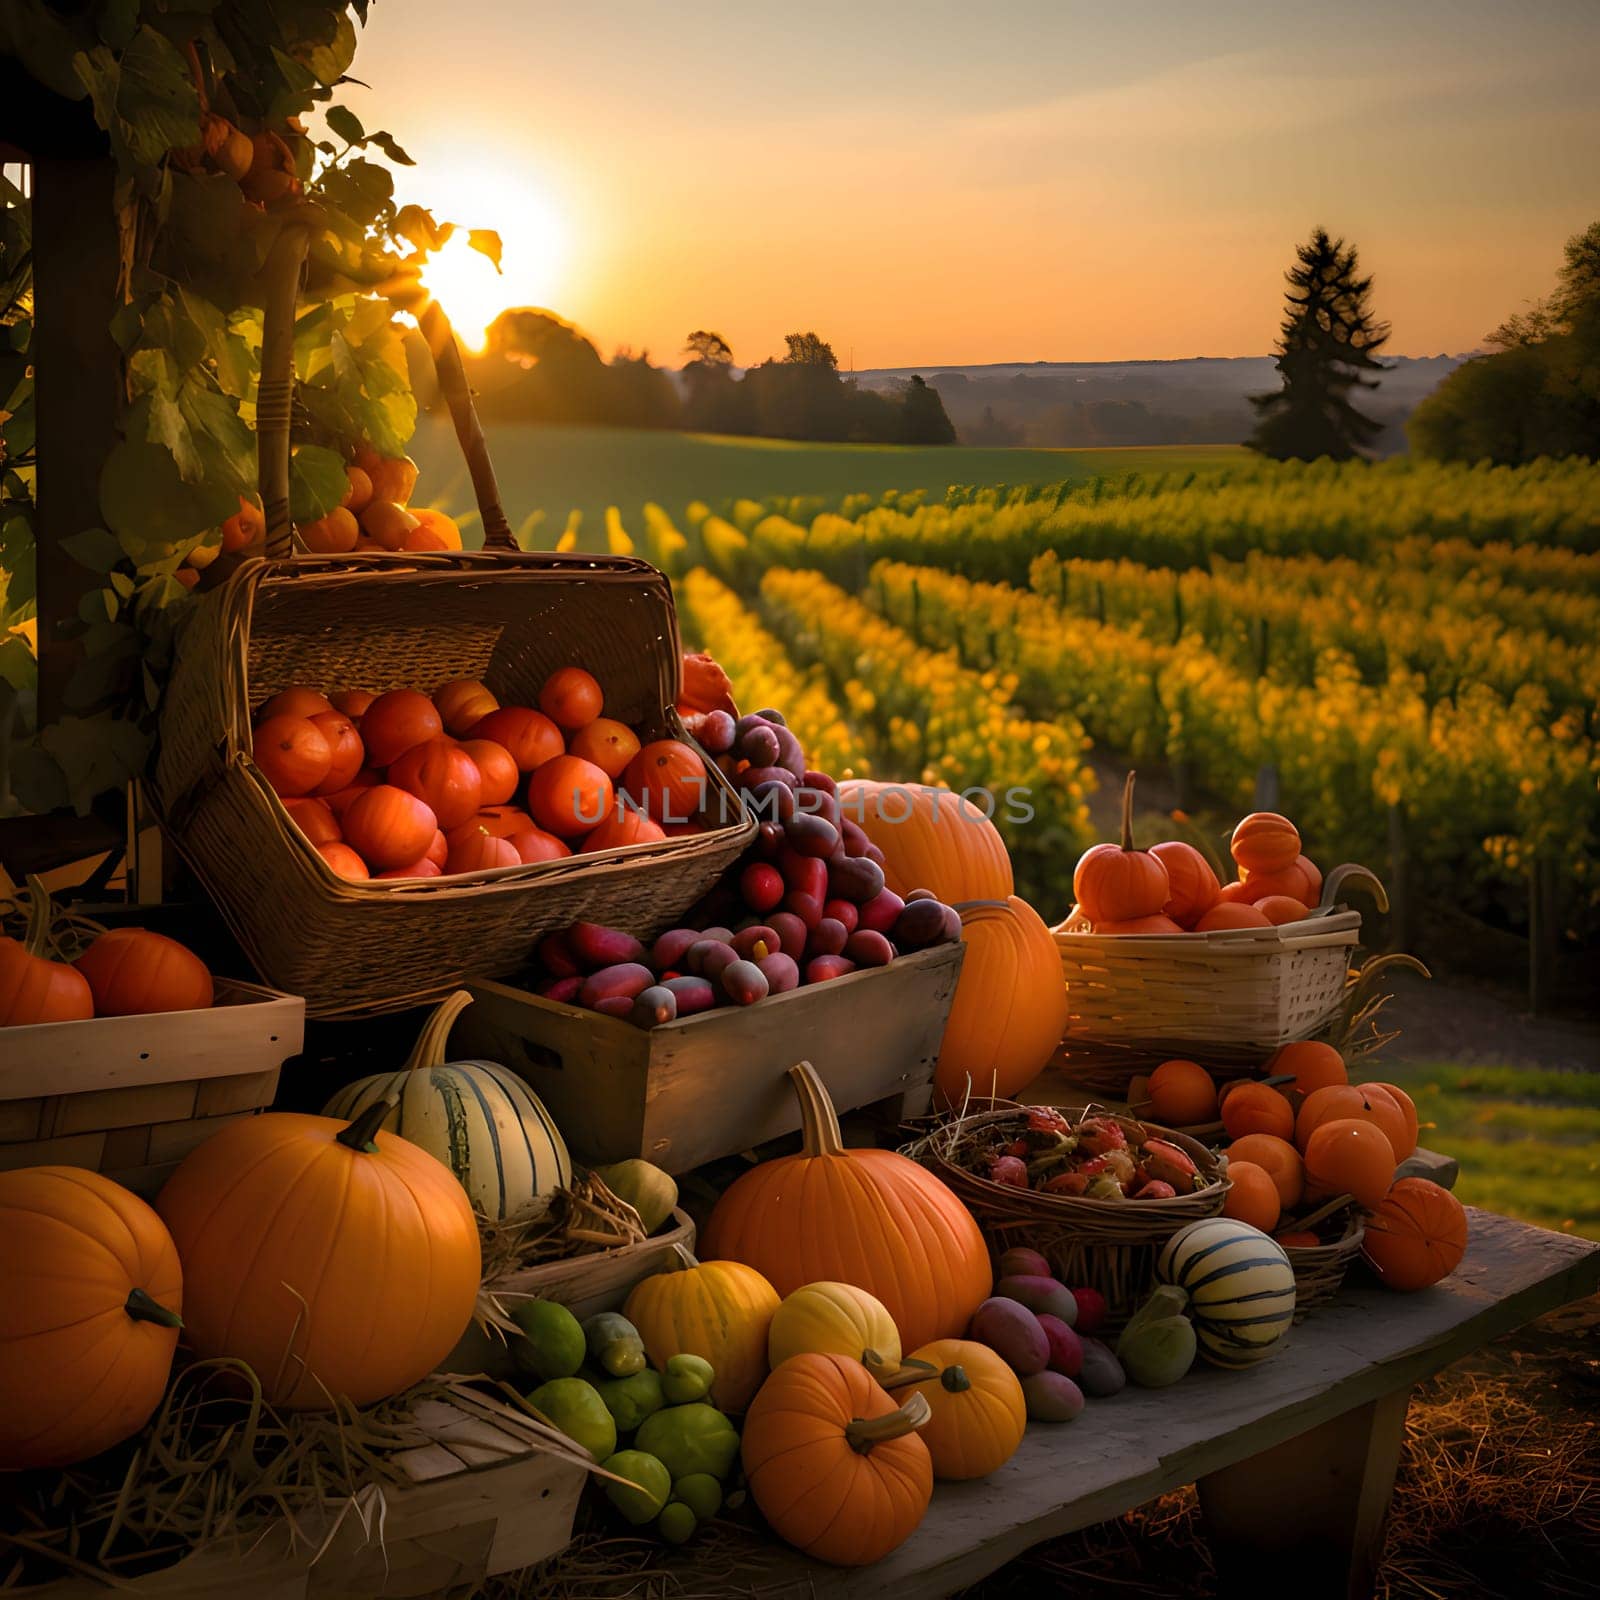 Harvested crops from the field on a wooden table in the background sunset over the field. Pumpkin as a dish of thanksgiving for the harvest, picture on a white isolated background. An atmosphere of joy and celebration.